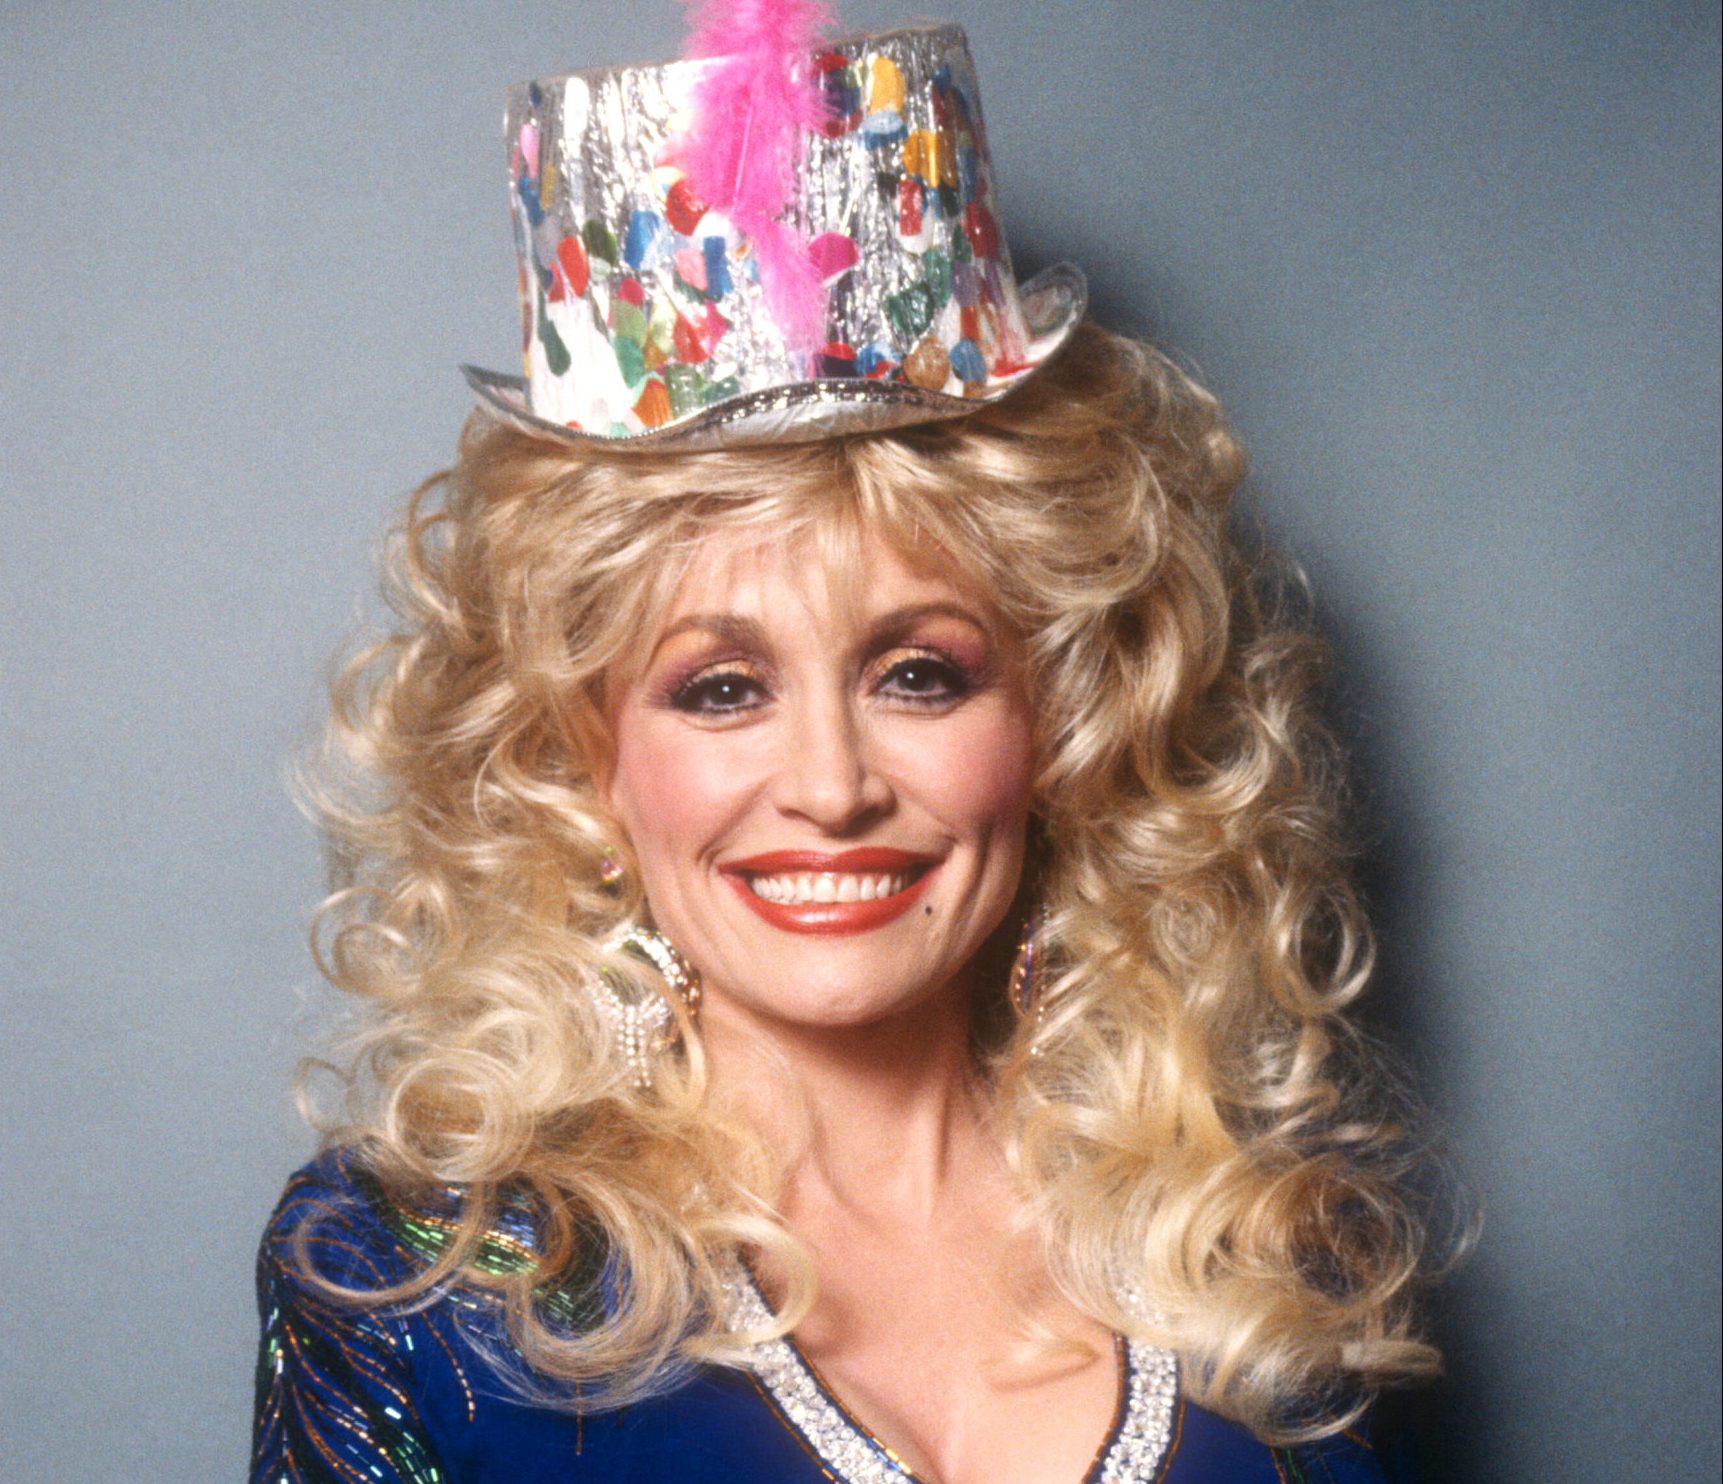  American singer and songwriter Dolly Parton poses for a portrait with her party hat for her birthday circa 1990's. 